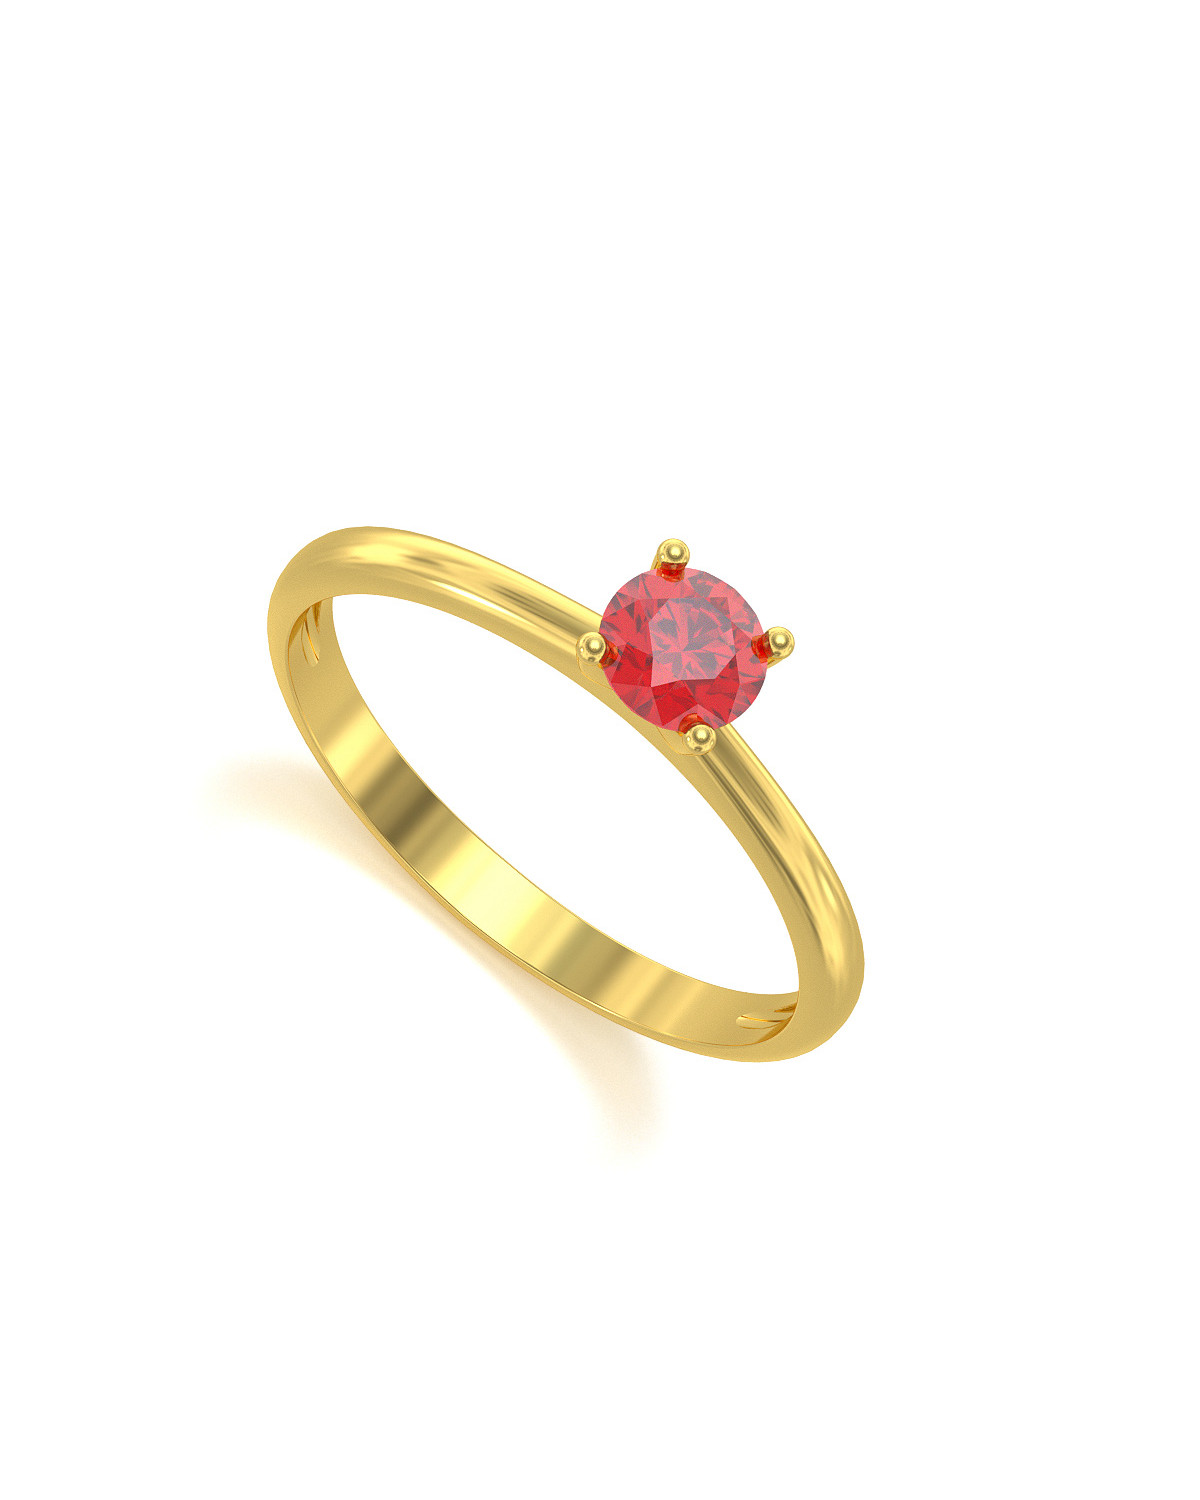 Bague Solitaire Or Jaune Rubis 1.59grs